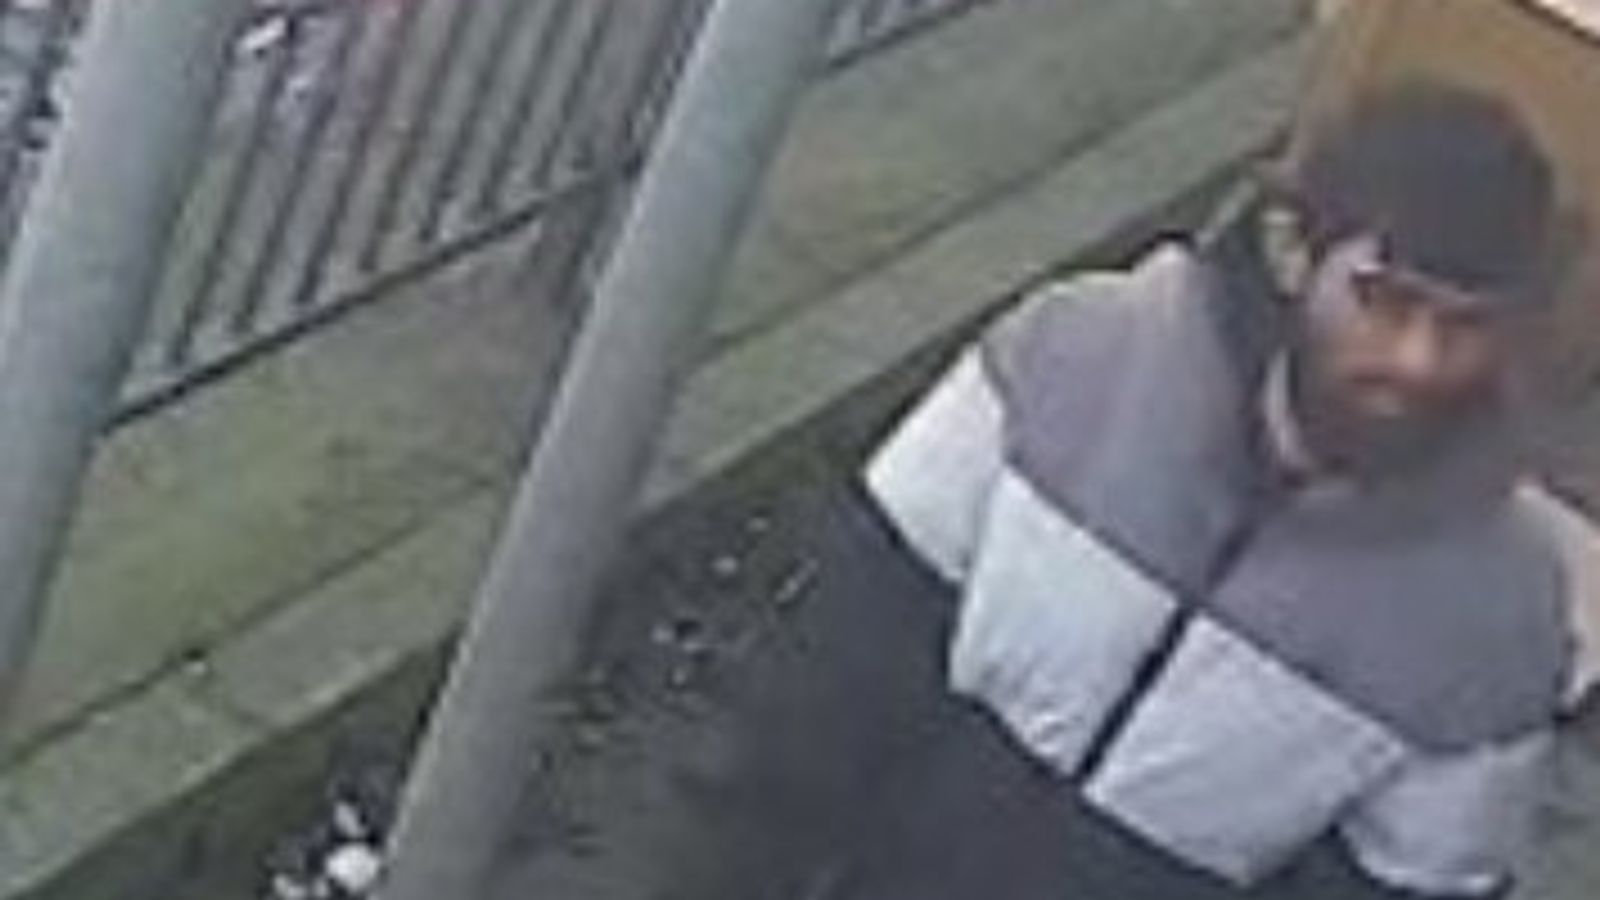 Man wanted over fatal stabbing of woman in Bradford